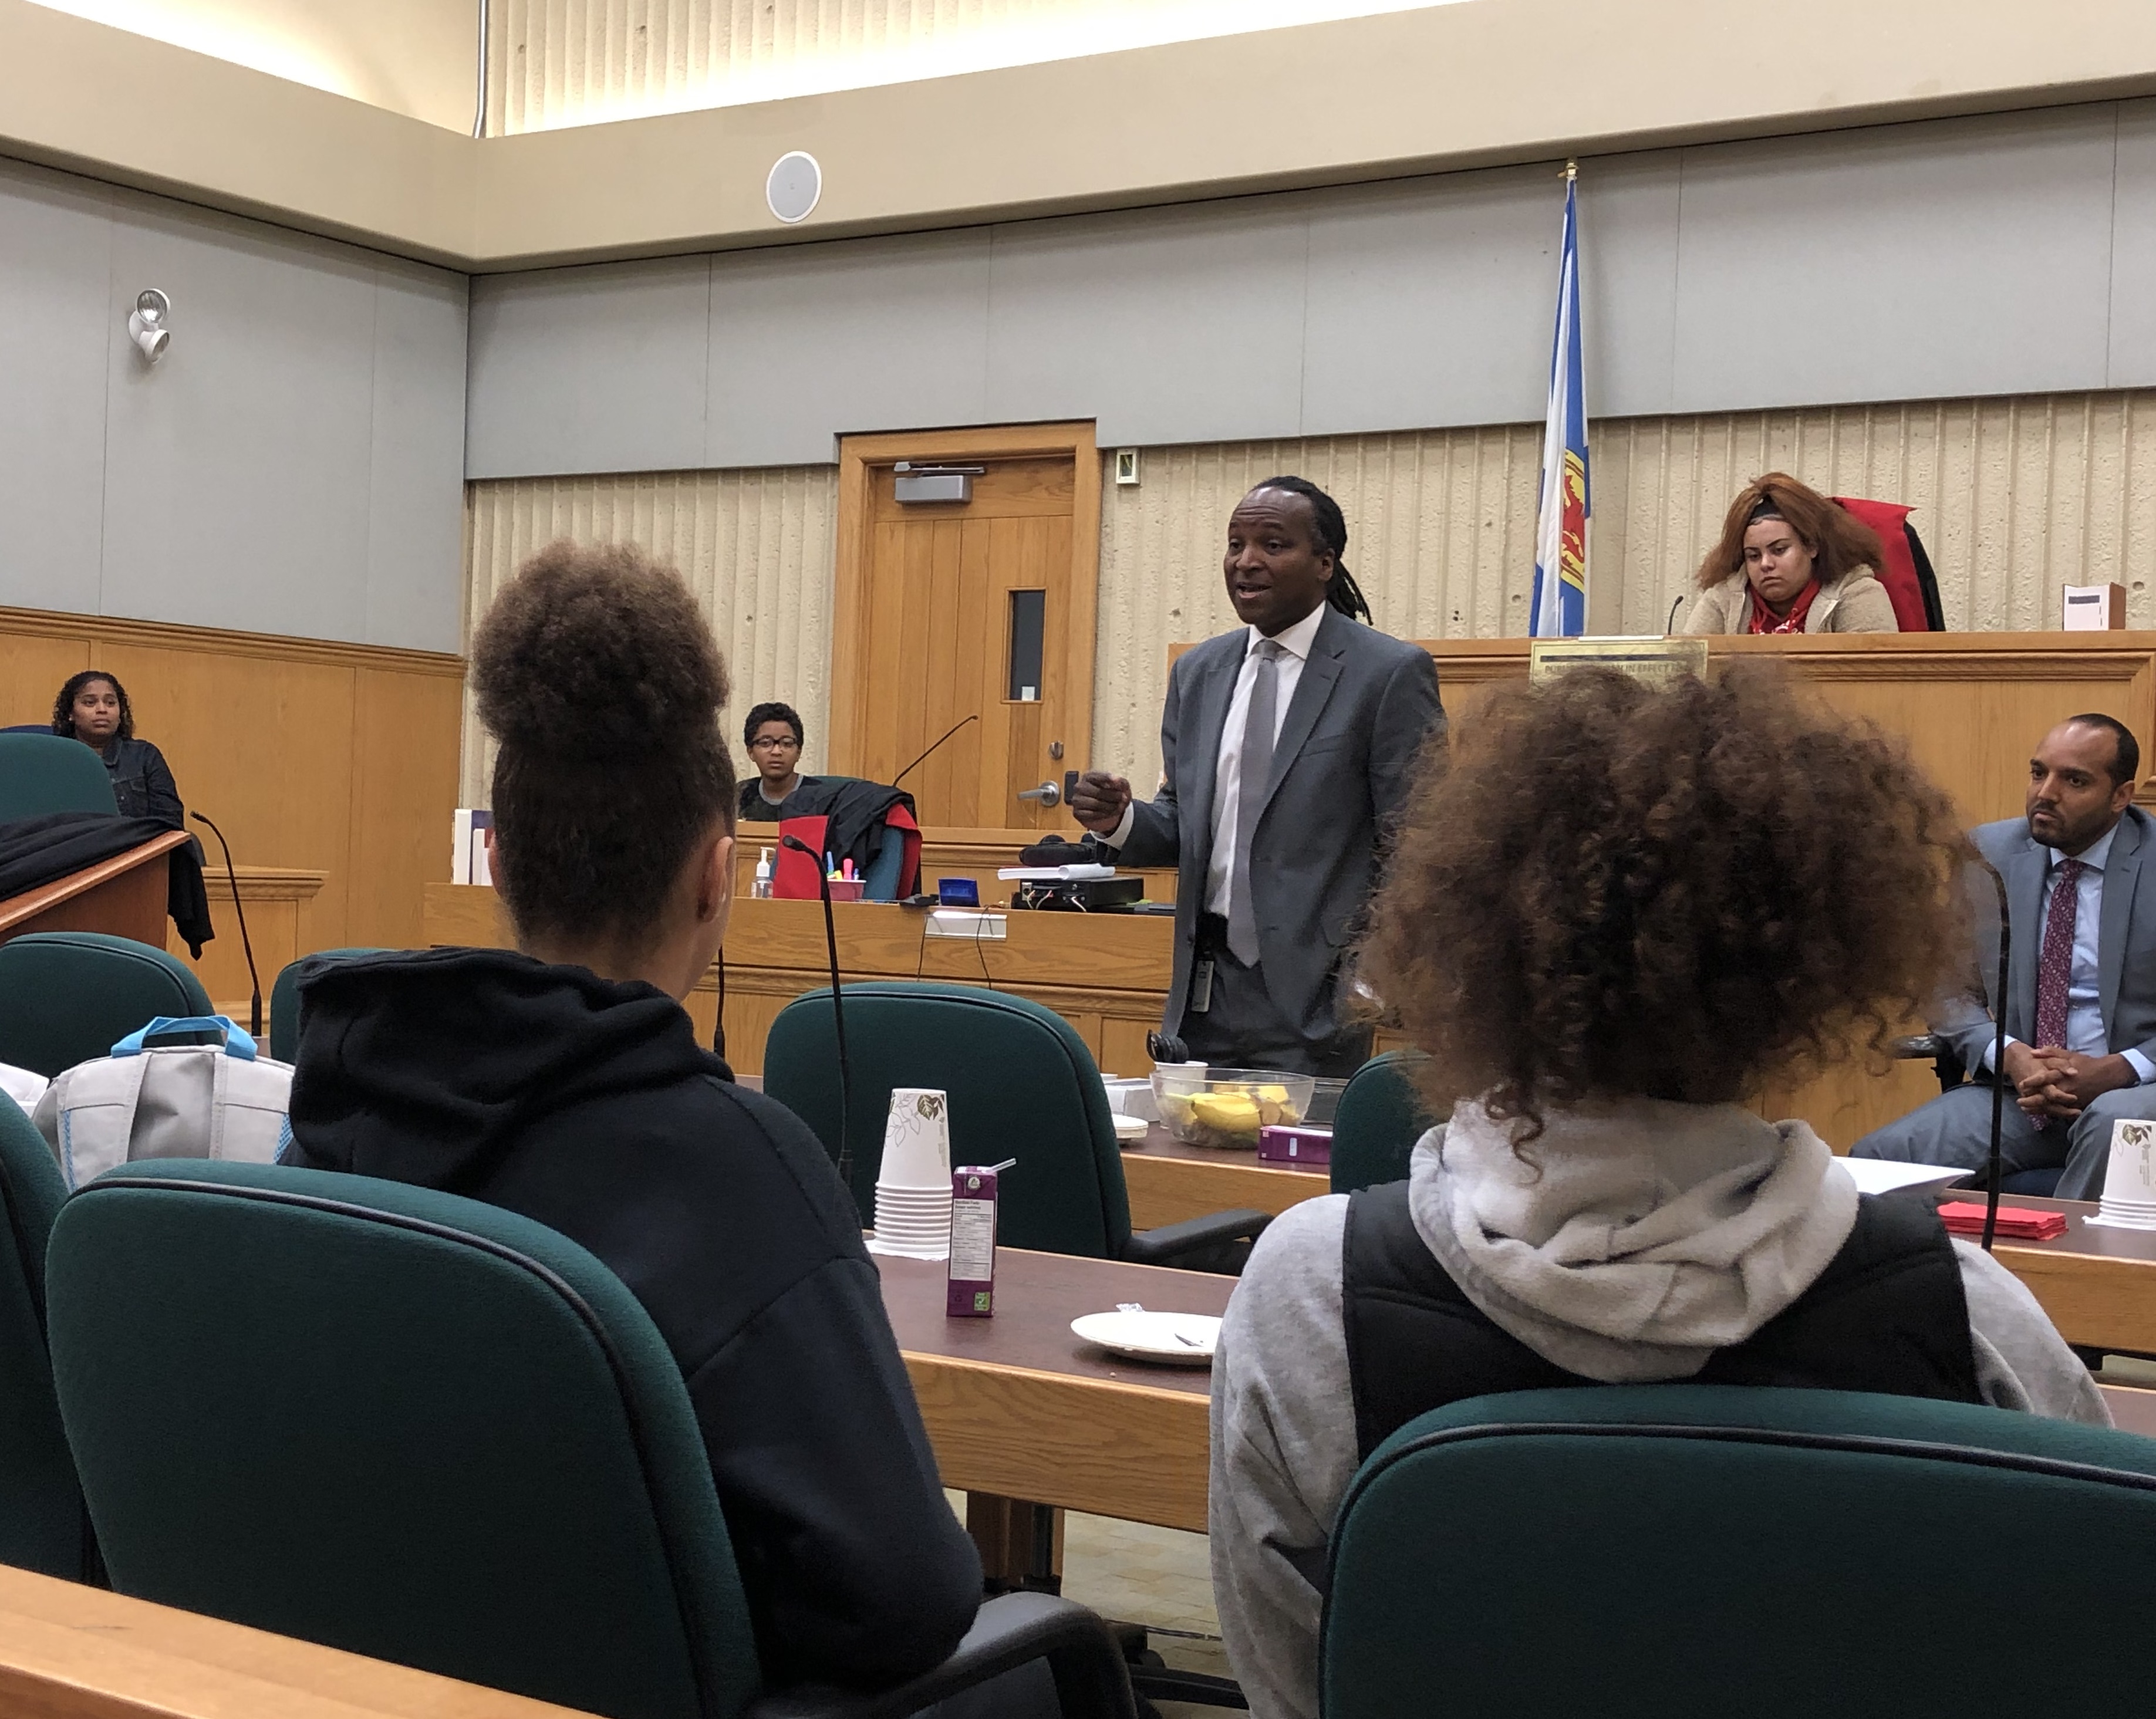 A Crown Attorney talks to students in a courtroom.